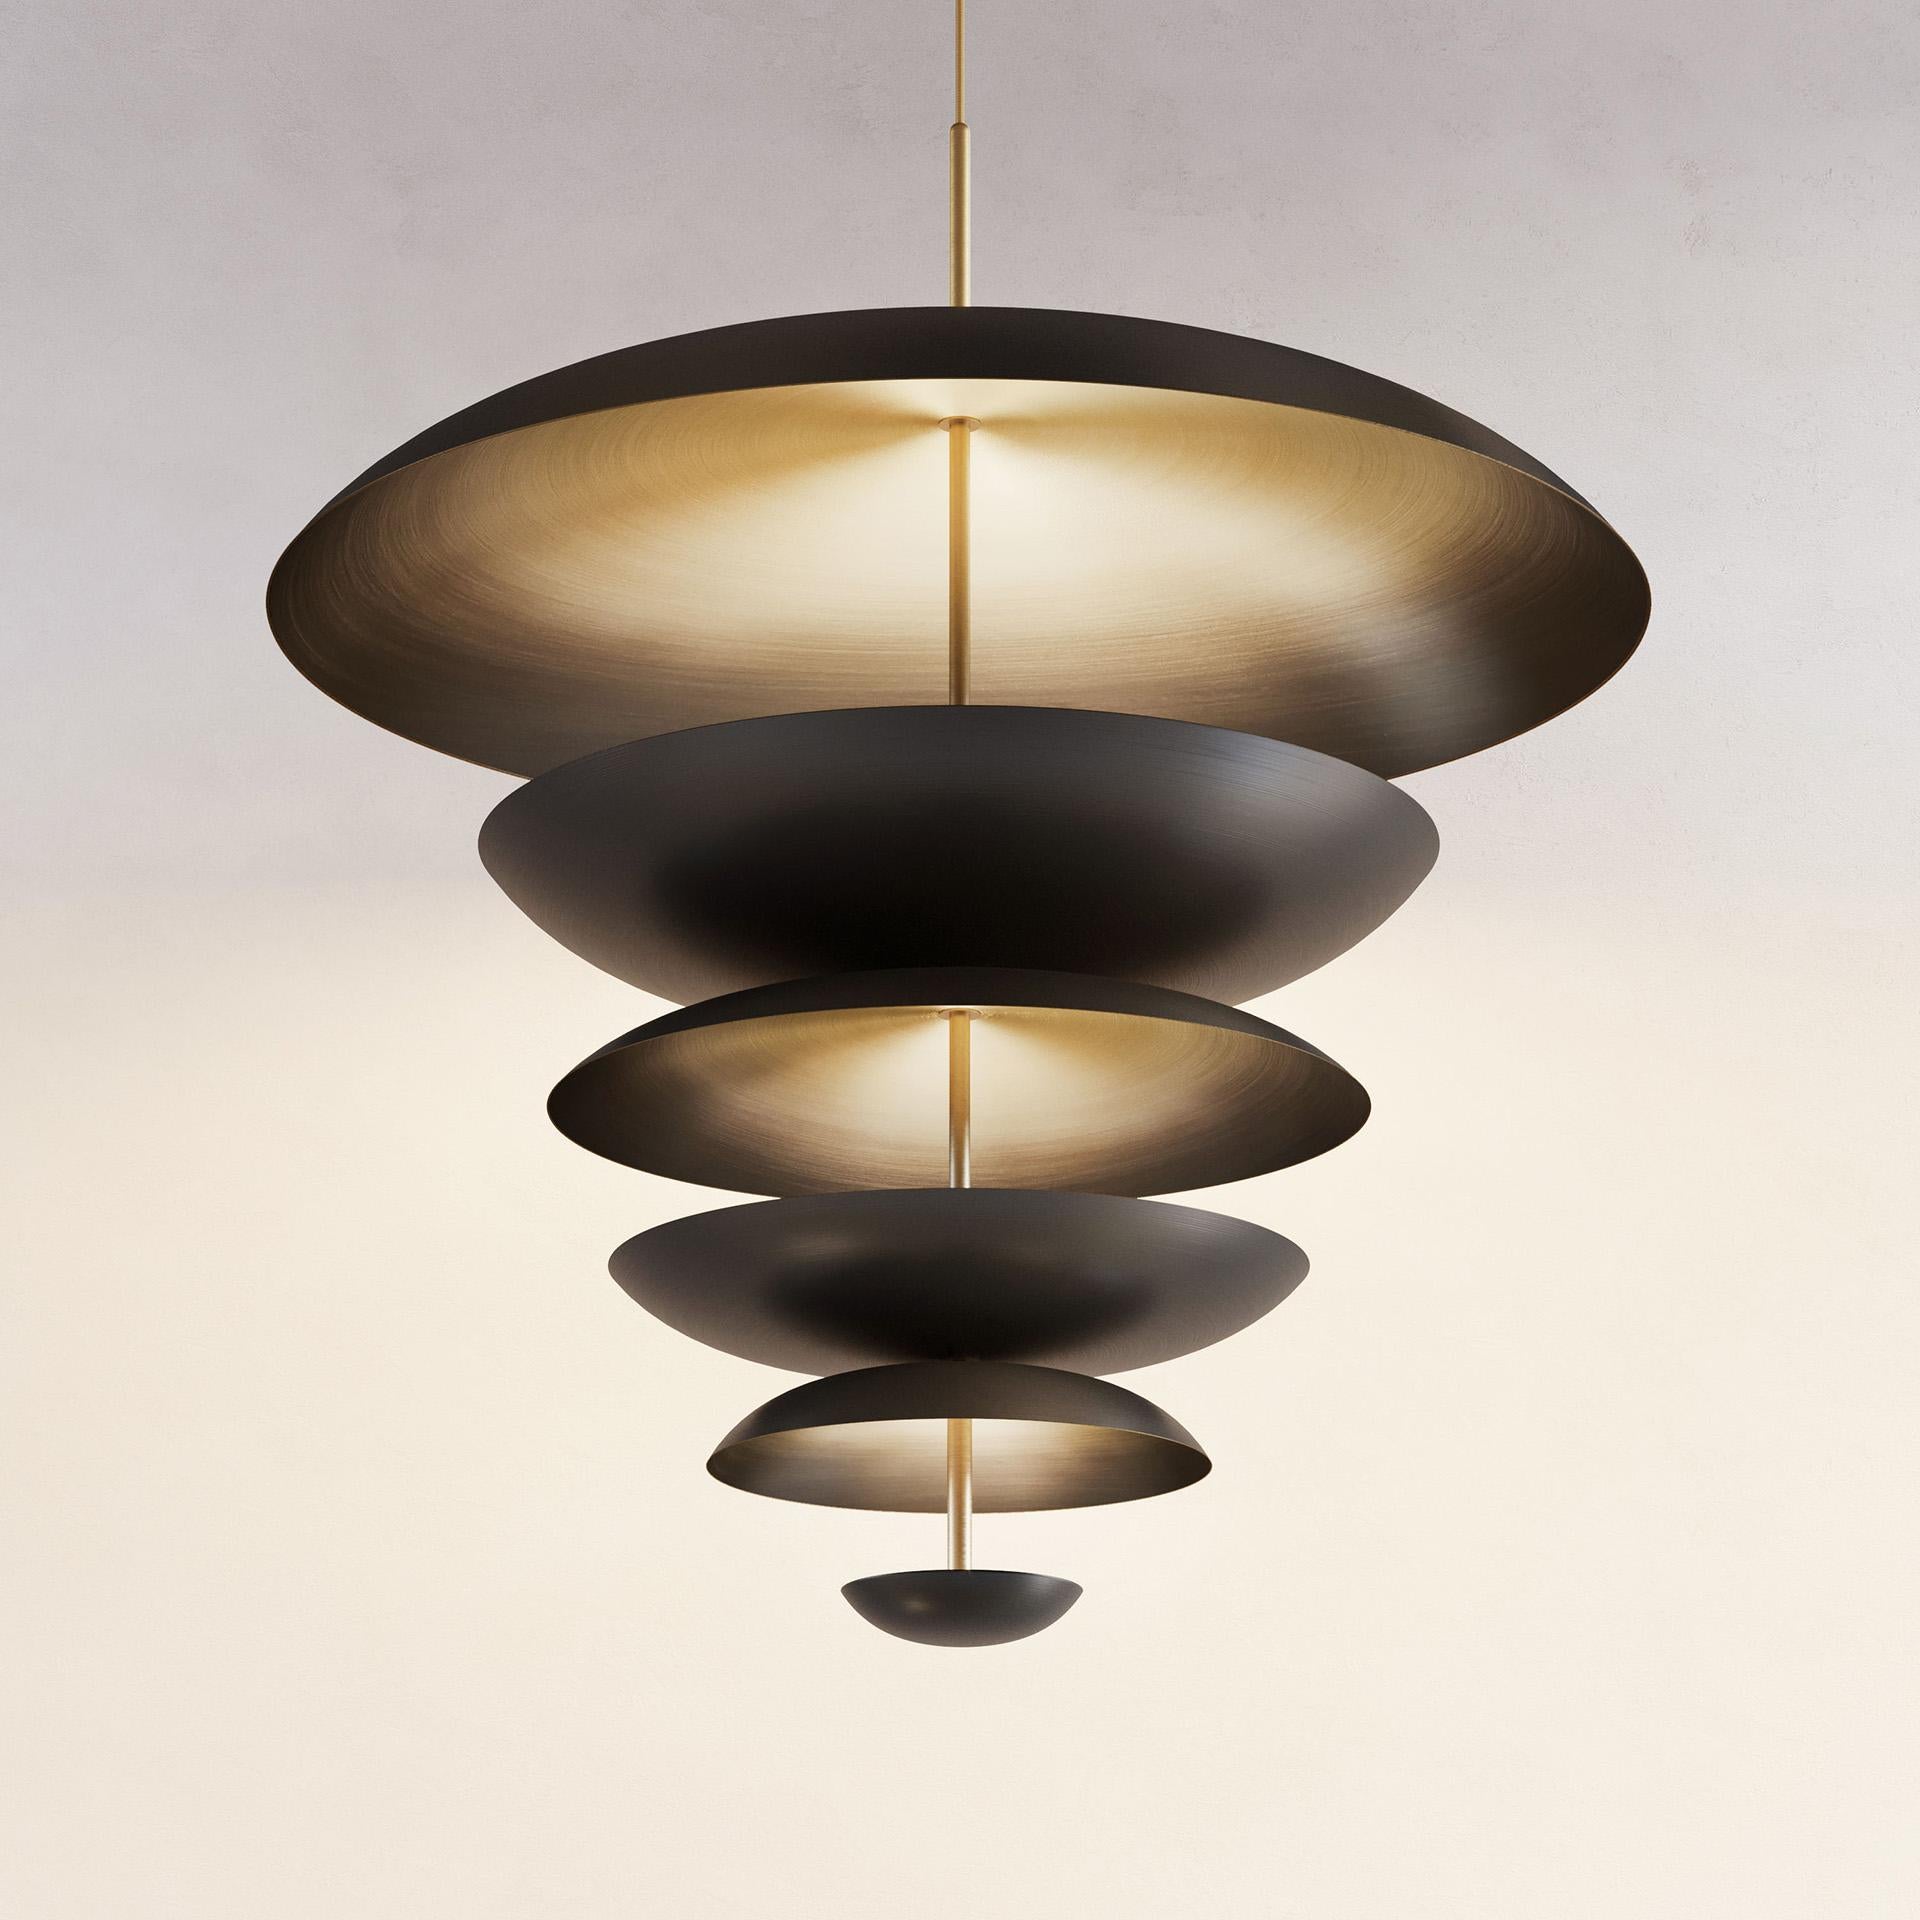 Regolith Chandelier XL 100 by Atelier001
Dimensions: D100 x H108 cm
Materials: Shade Dark bronze patinated brass
Framework Satin brass
Also Available: In different dimension and finishes.

All our lamps can be wired according to each country. If